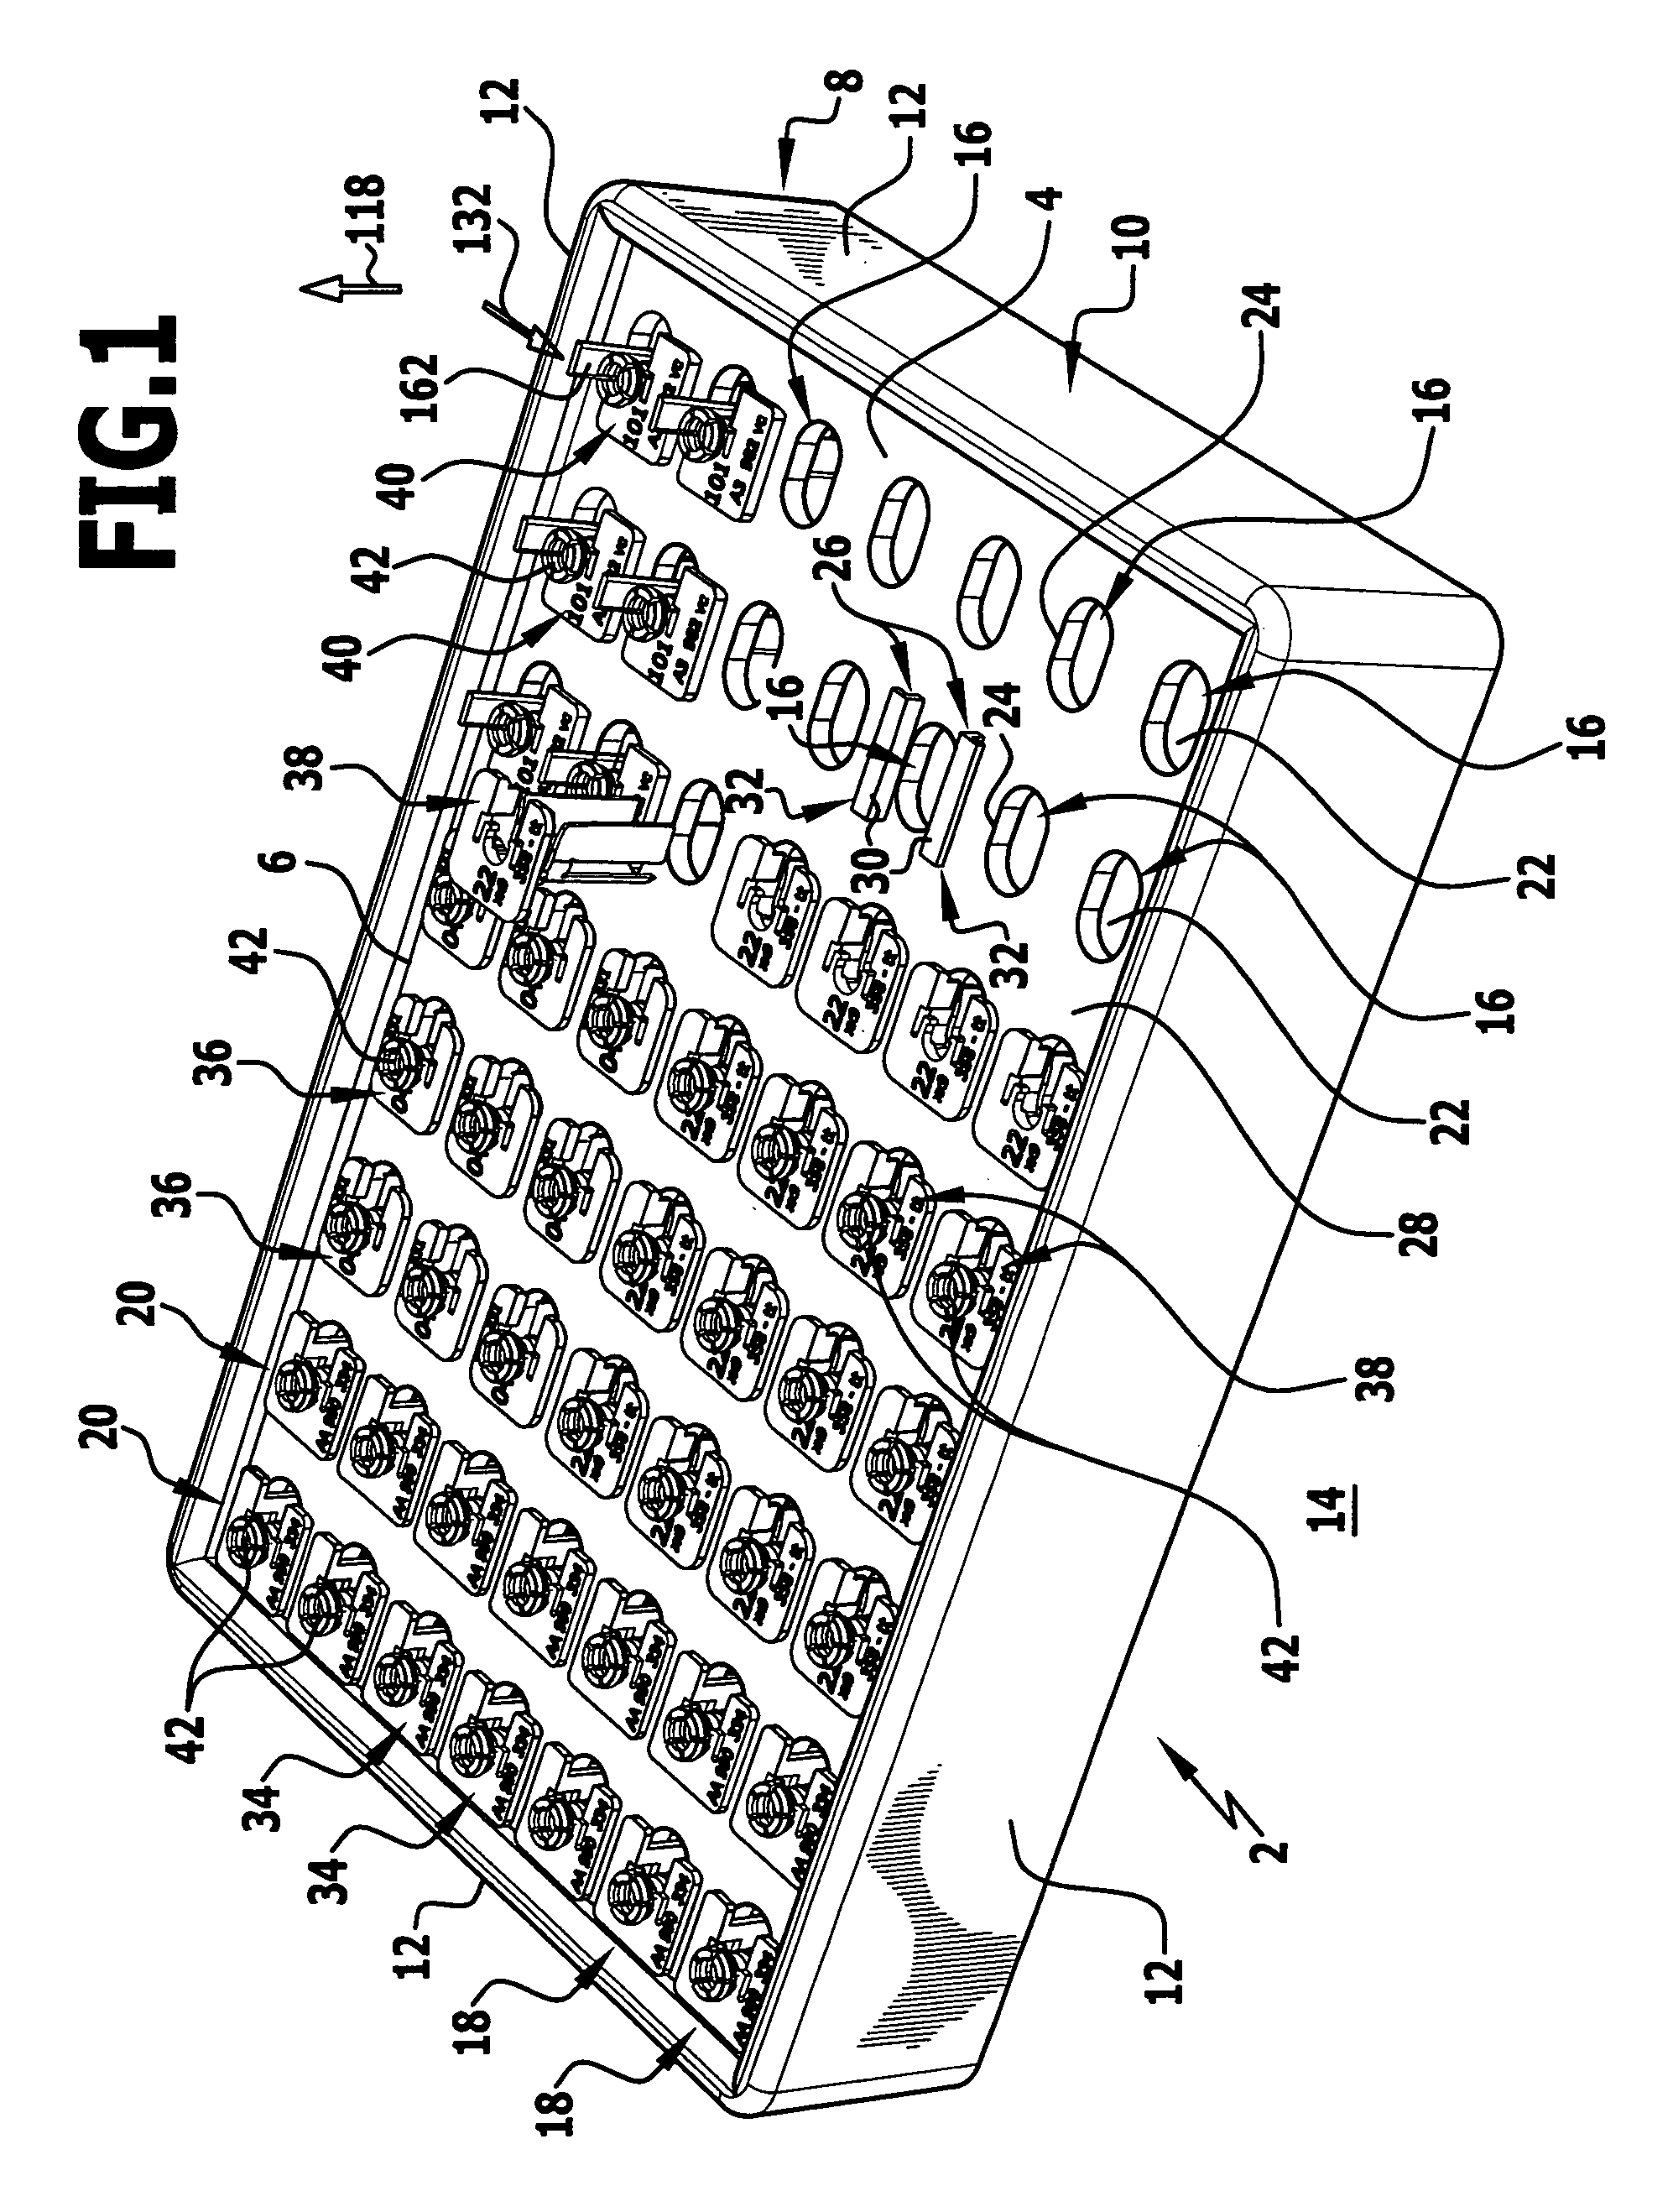 Holding device for an implant